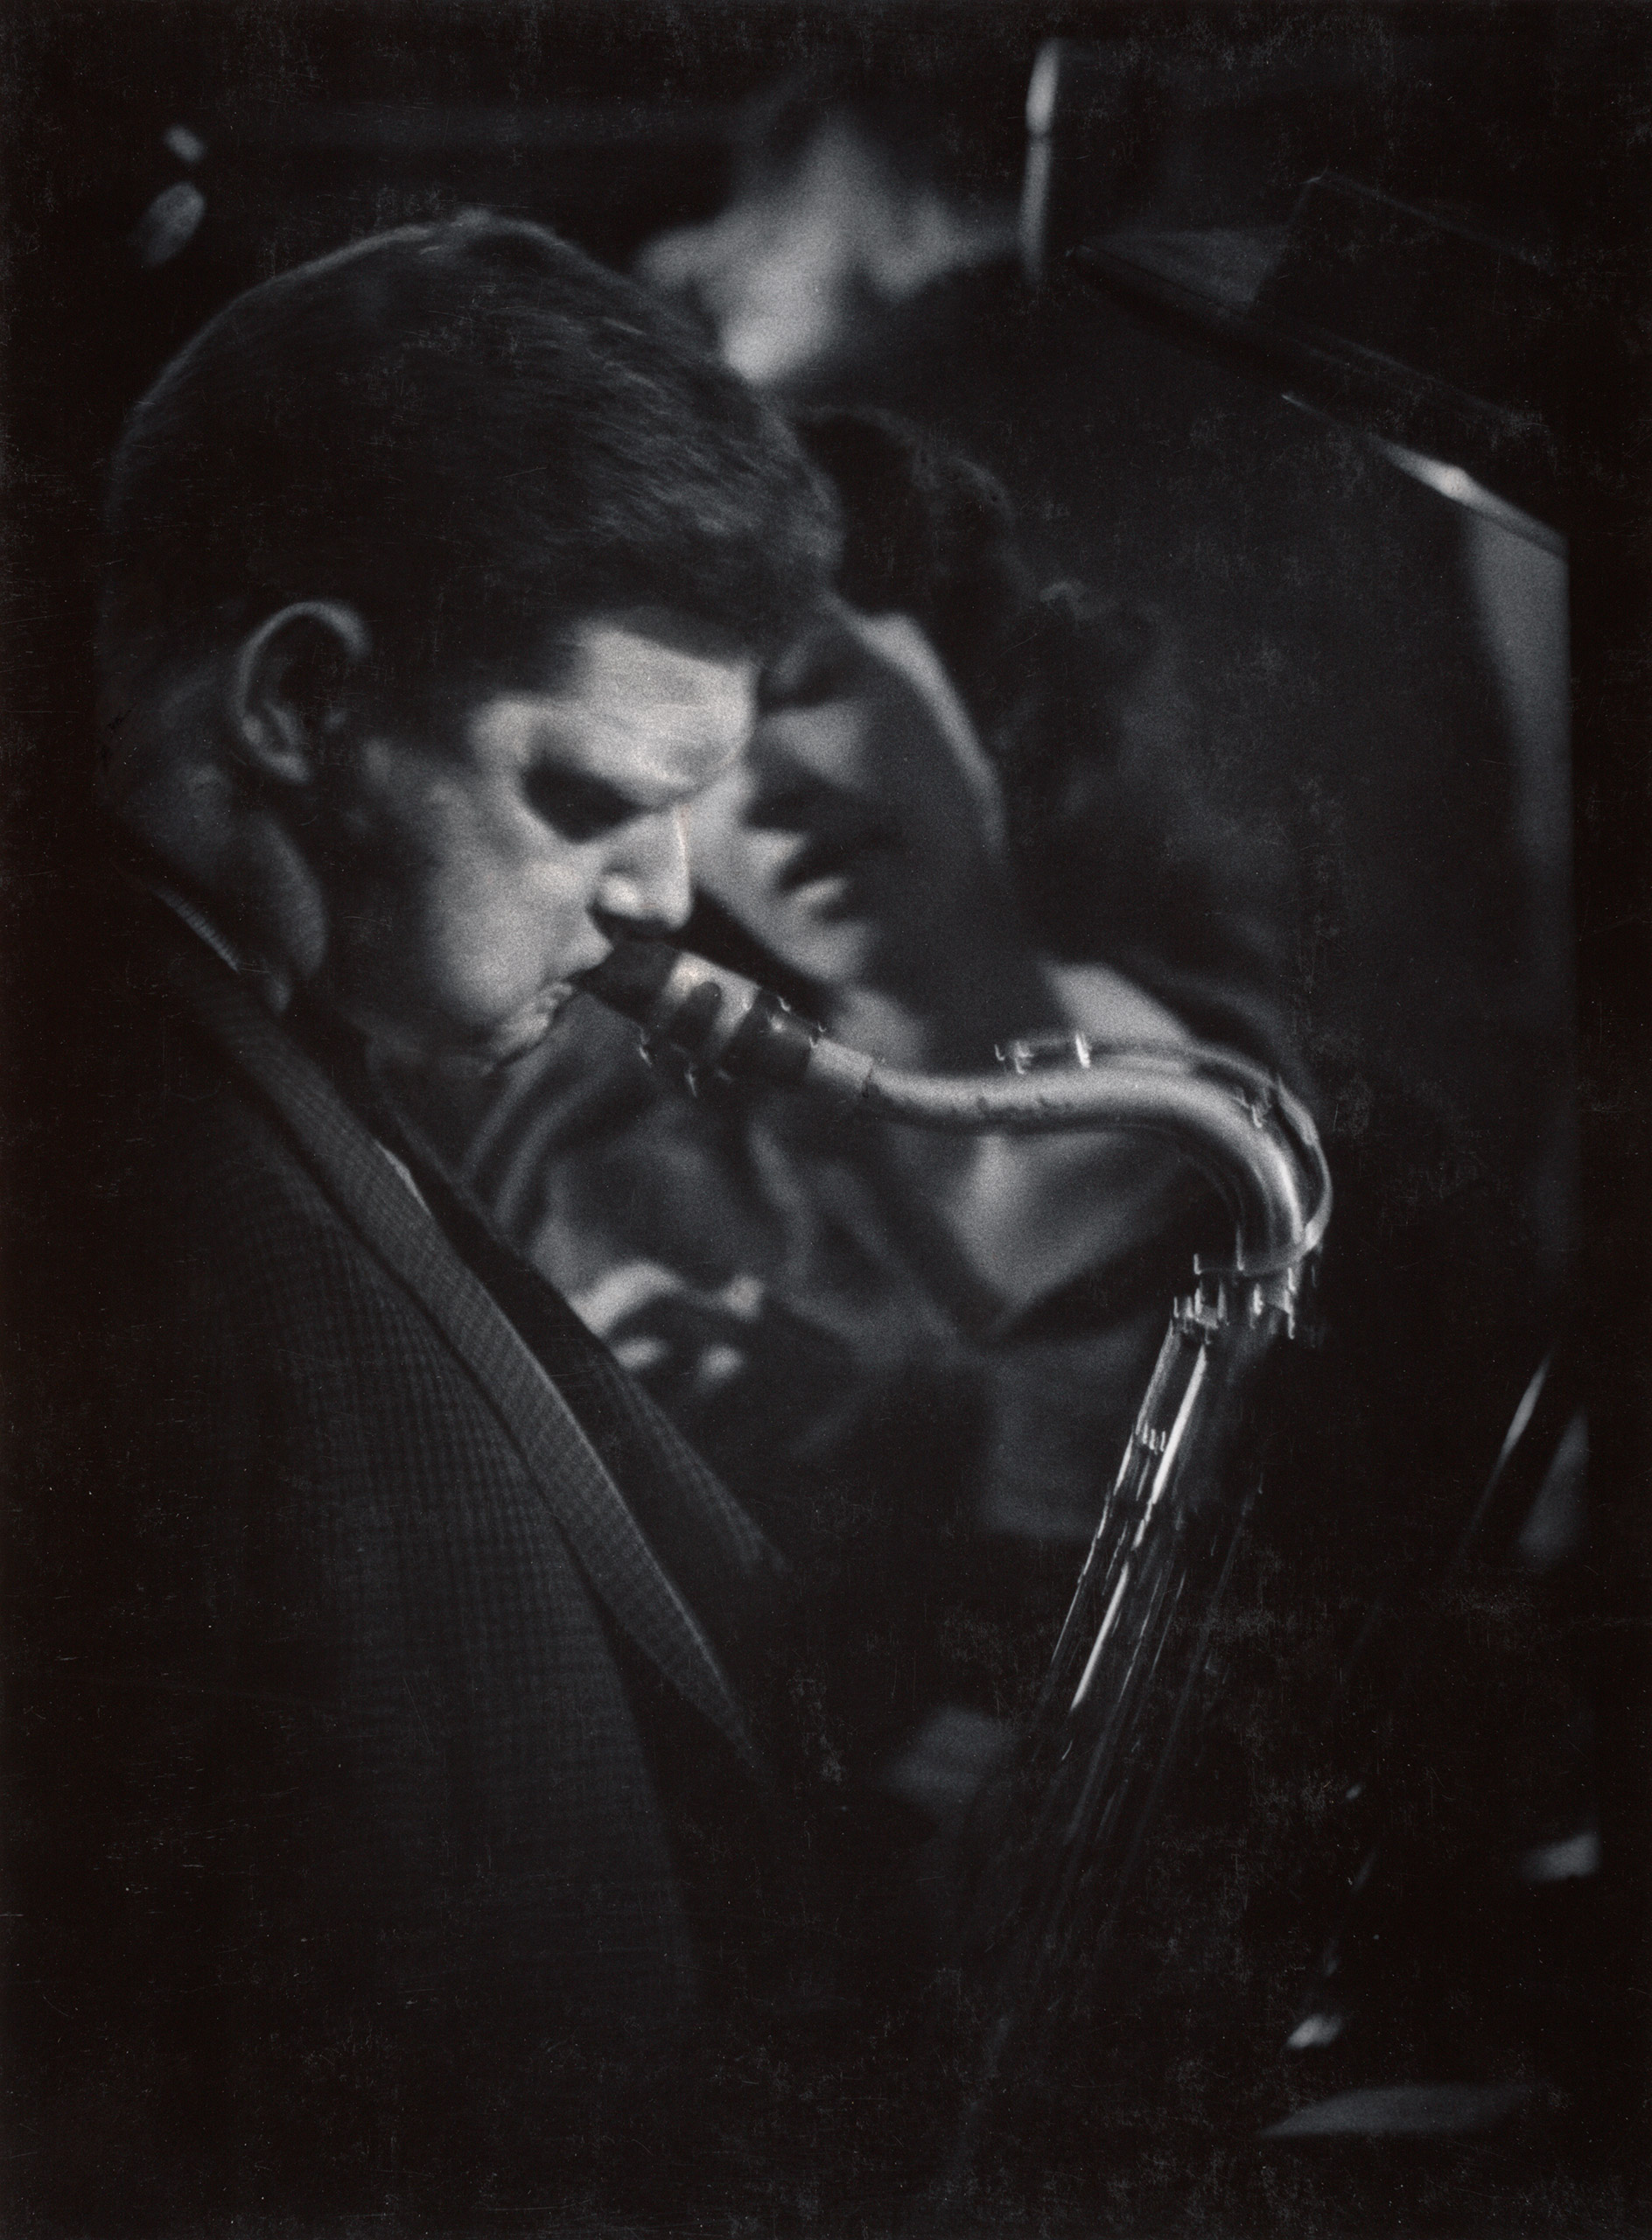 Portrait of musician Zoot Sims by W. Eugene Smith.